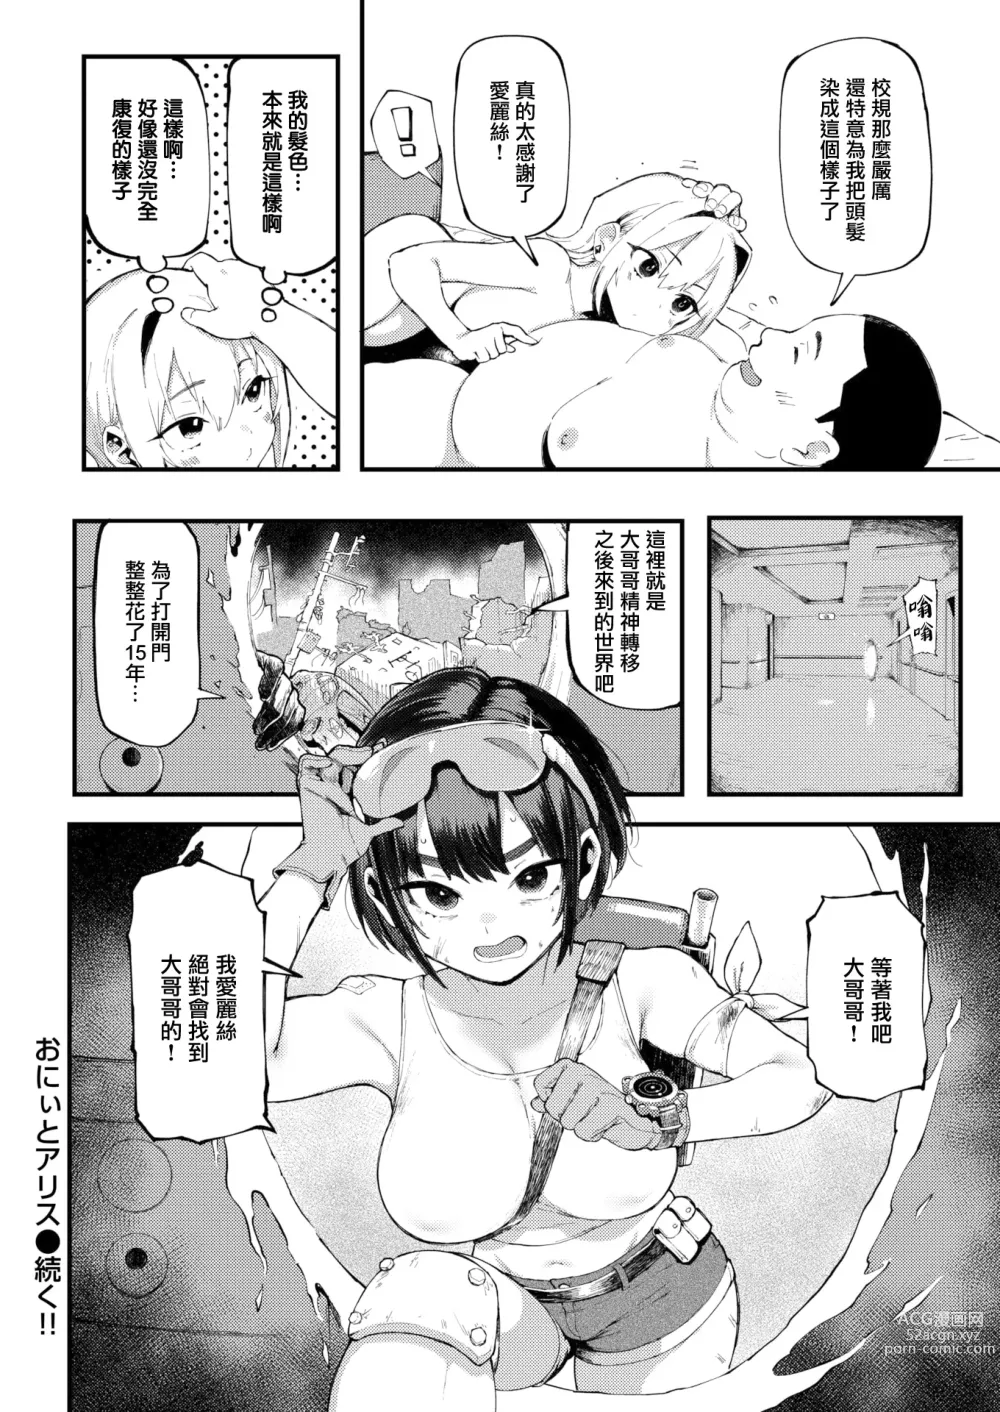 Page 33 of doujinshi Big Brother Battle